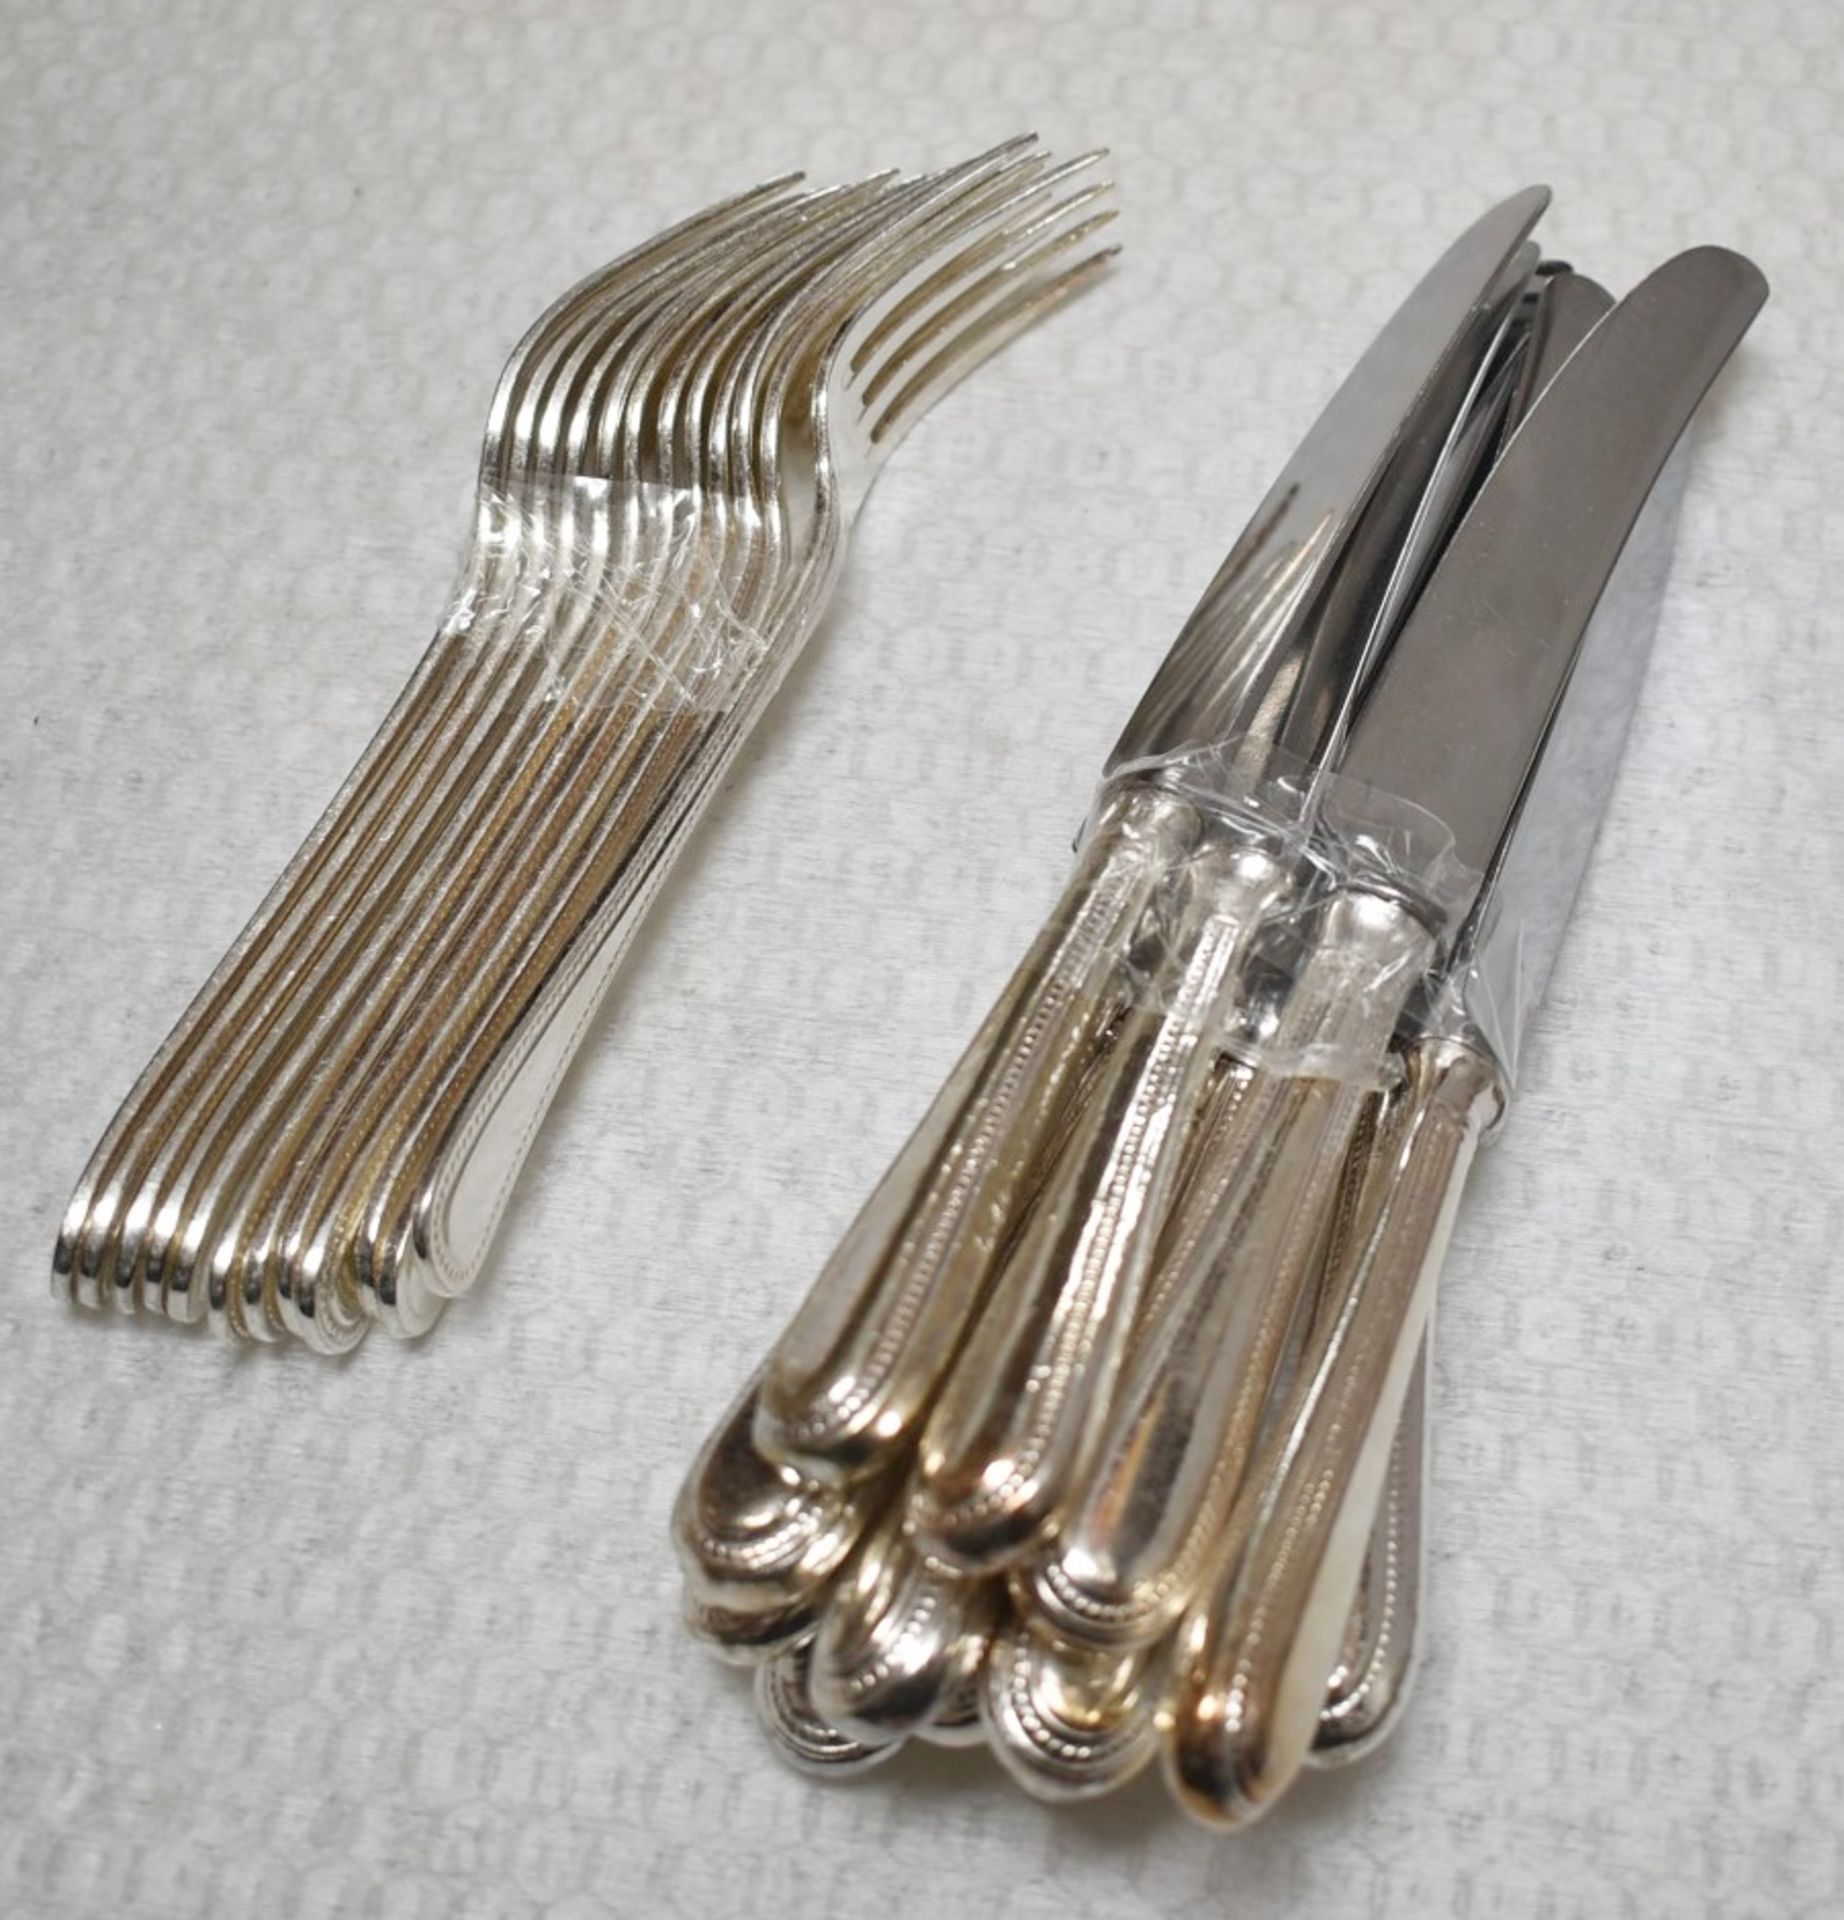 40 x Pieces of Silver Plated Stainless Steel Decorative Cutlery - Includes Knives, Forks, Spoons and - Image 8 of 11